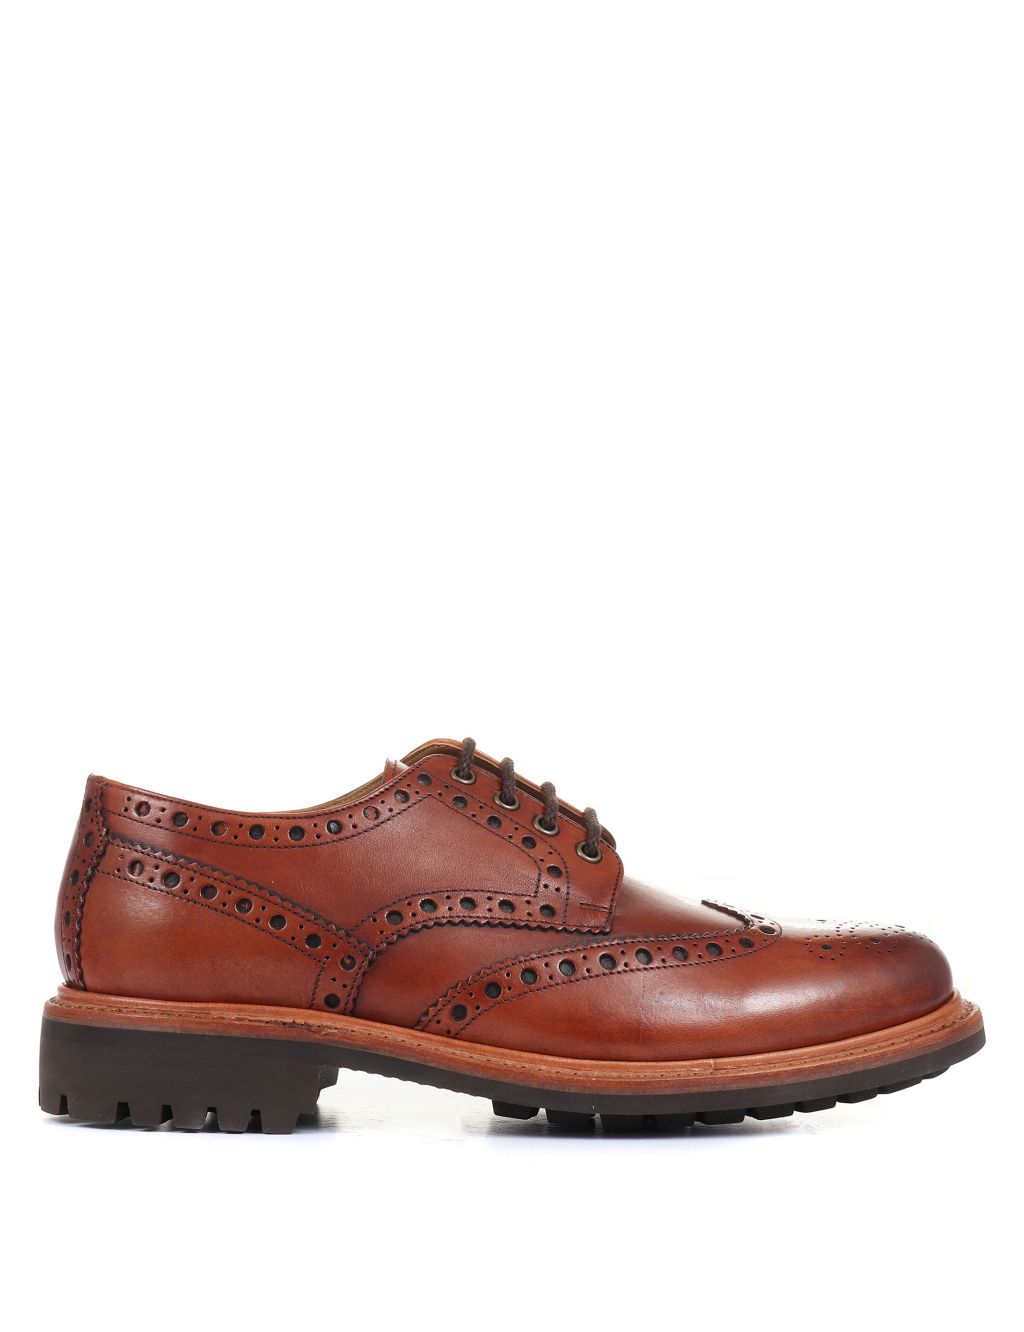 Leather Goodyear Welted Derby Shoes image 5